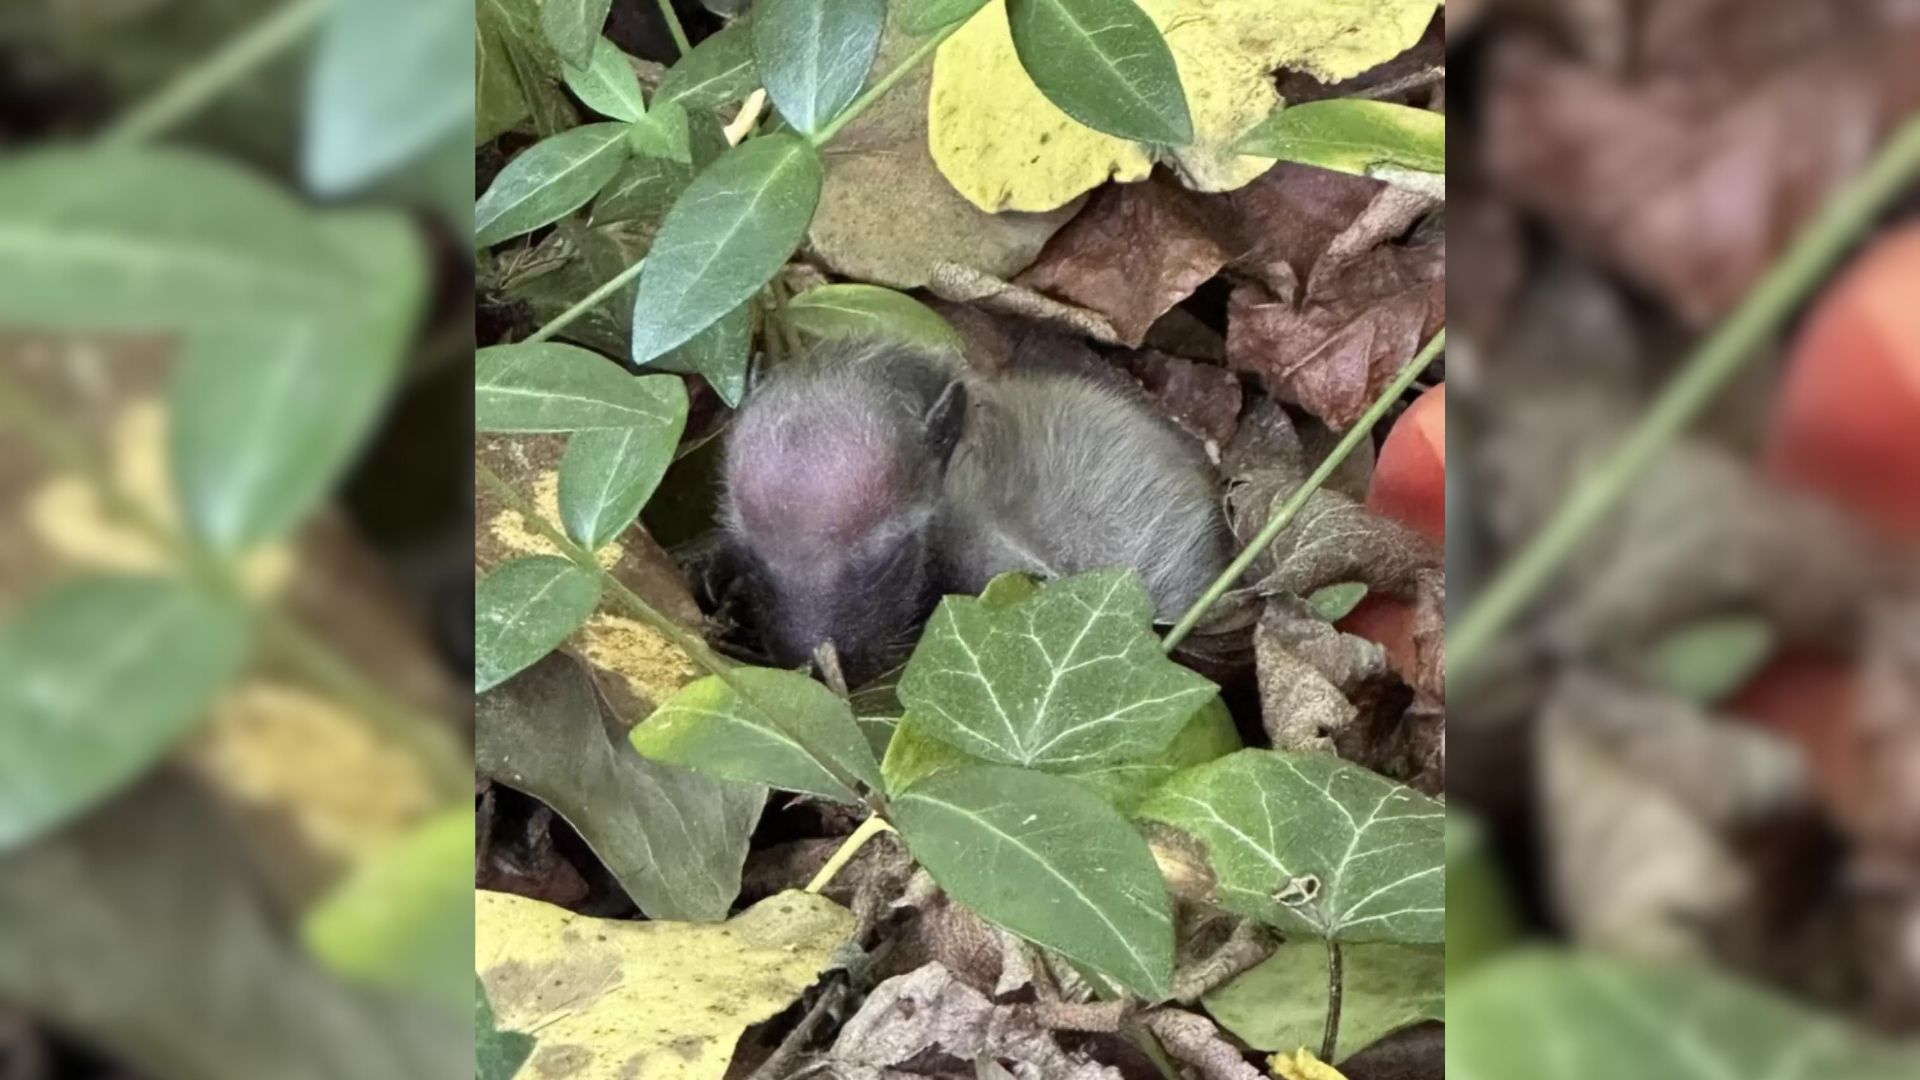 Woman Was Shocked To Find A Mysterious Small Animal While Hiking With Her Dog